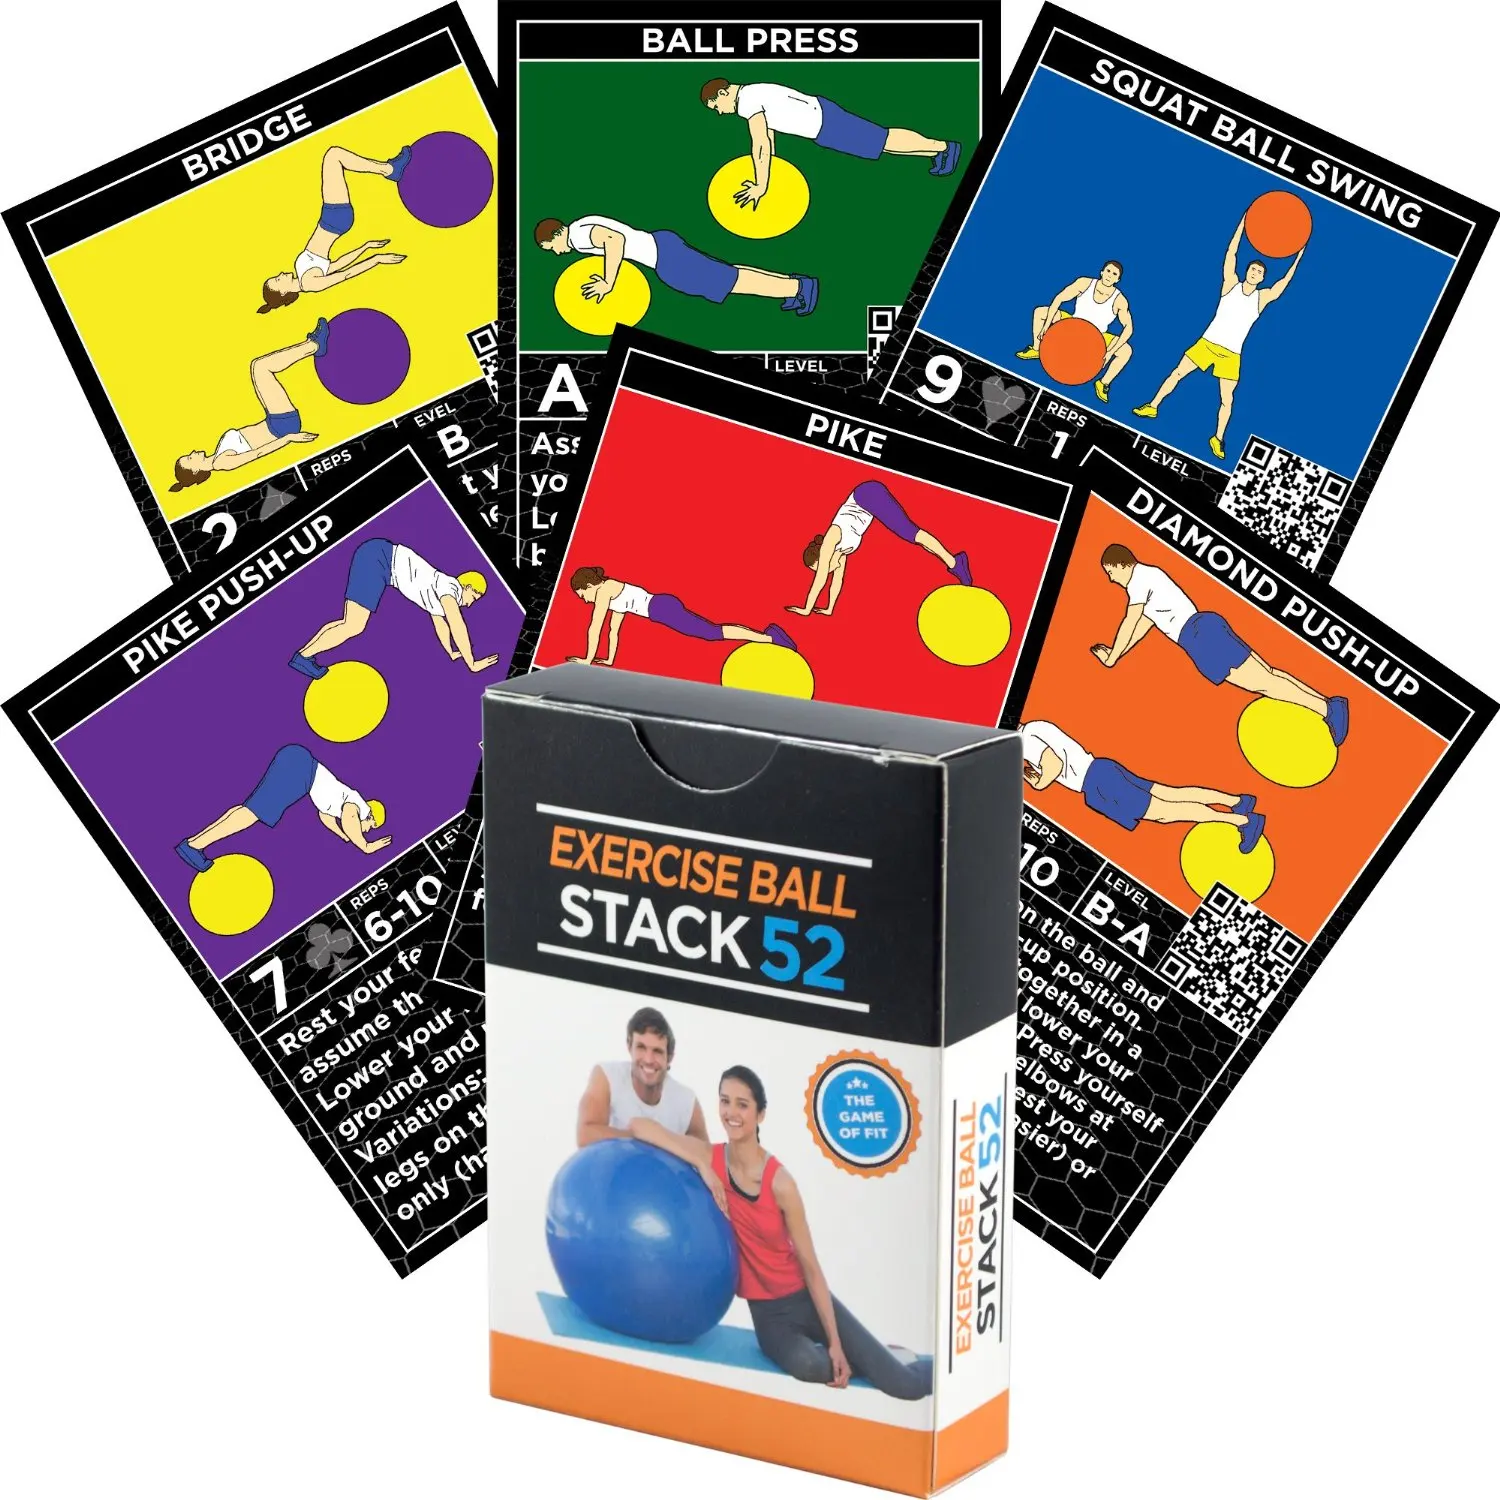 Video Instructions Included Exercise Band Workout Playing Card Game Resistance Band Exercise Cards by Stack 52 Home Fitness Training Program for Elastic Rubber Tubes and Stretch Band Sets.